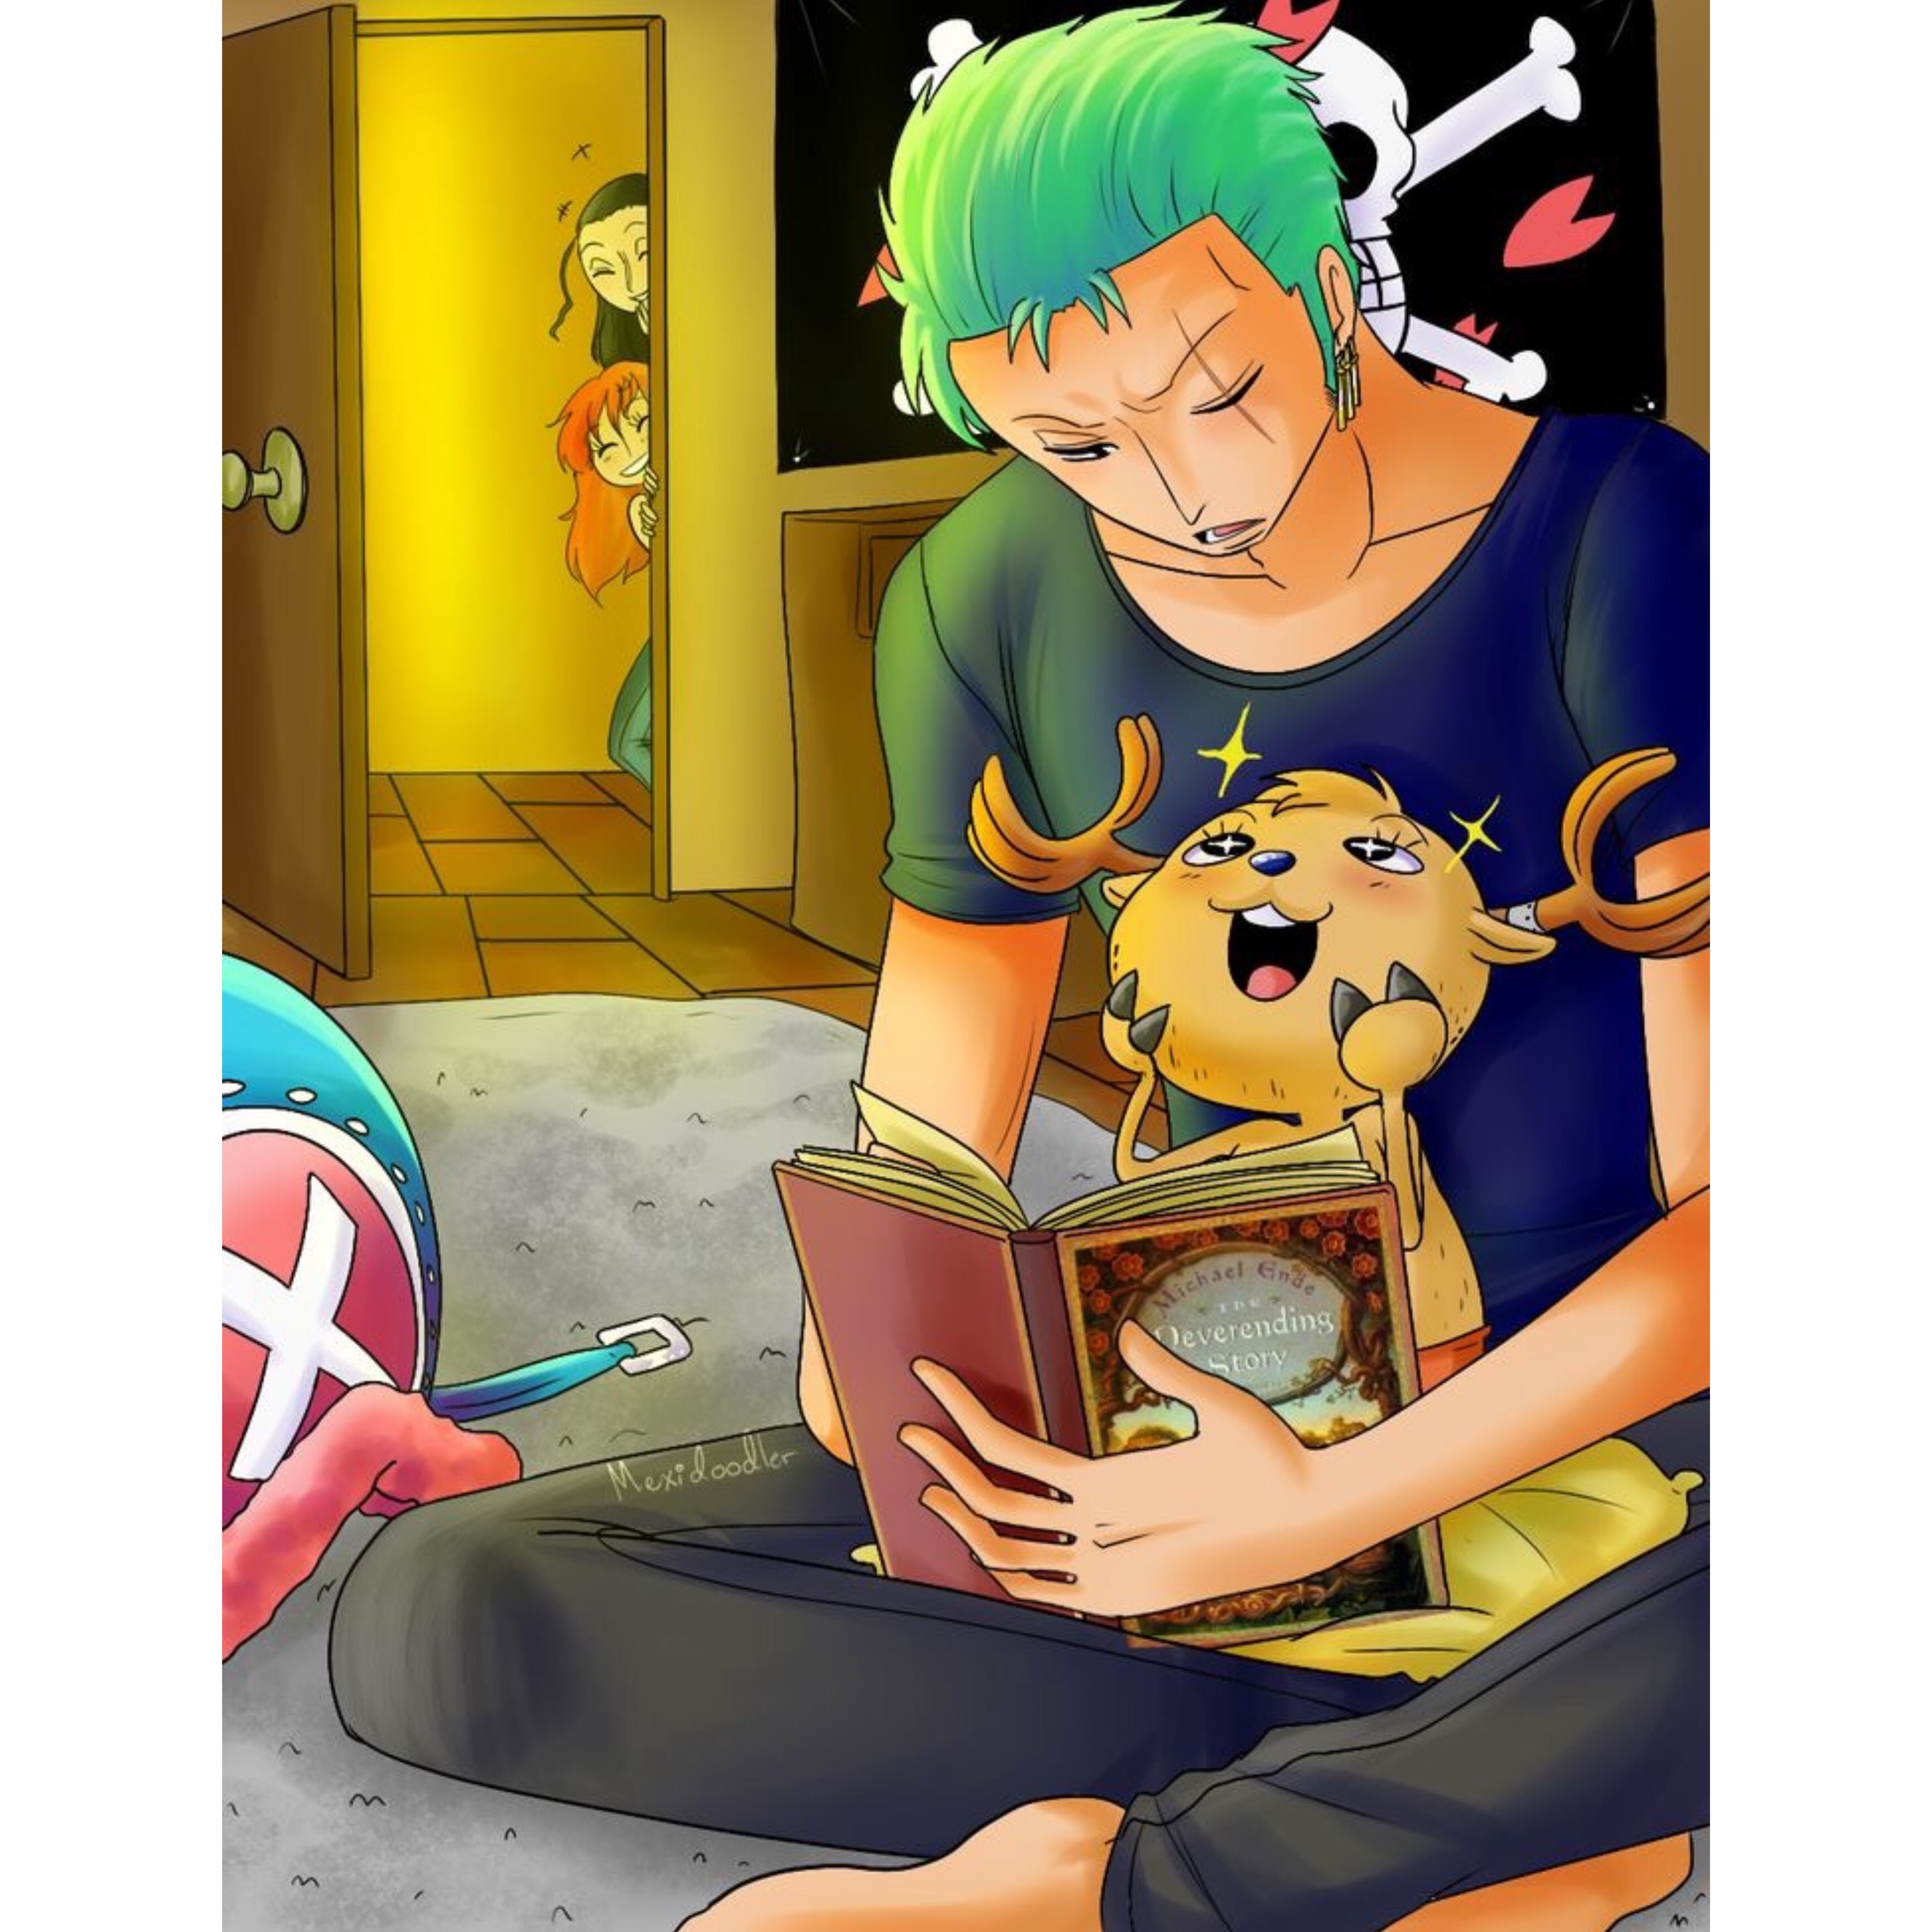 This visual is about onepiece zoro chopper robin nami Good night 💫.